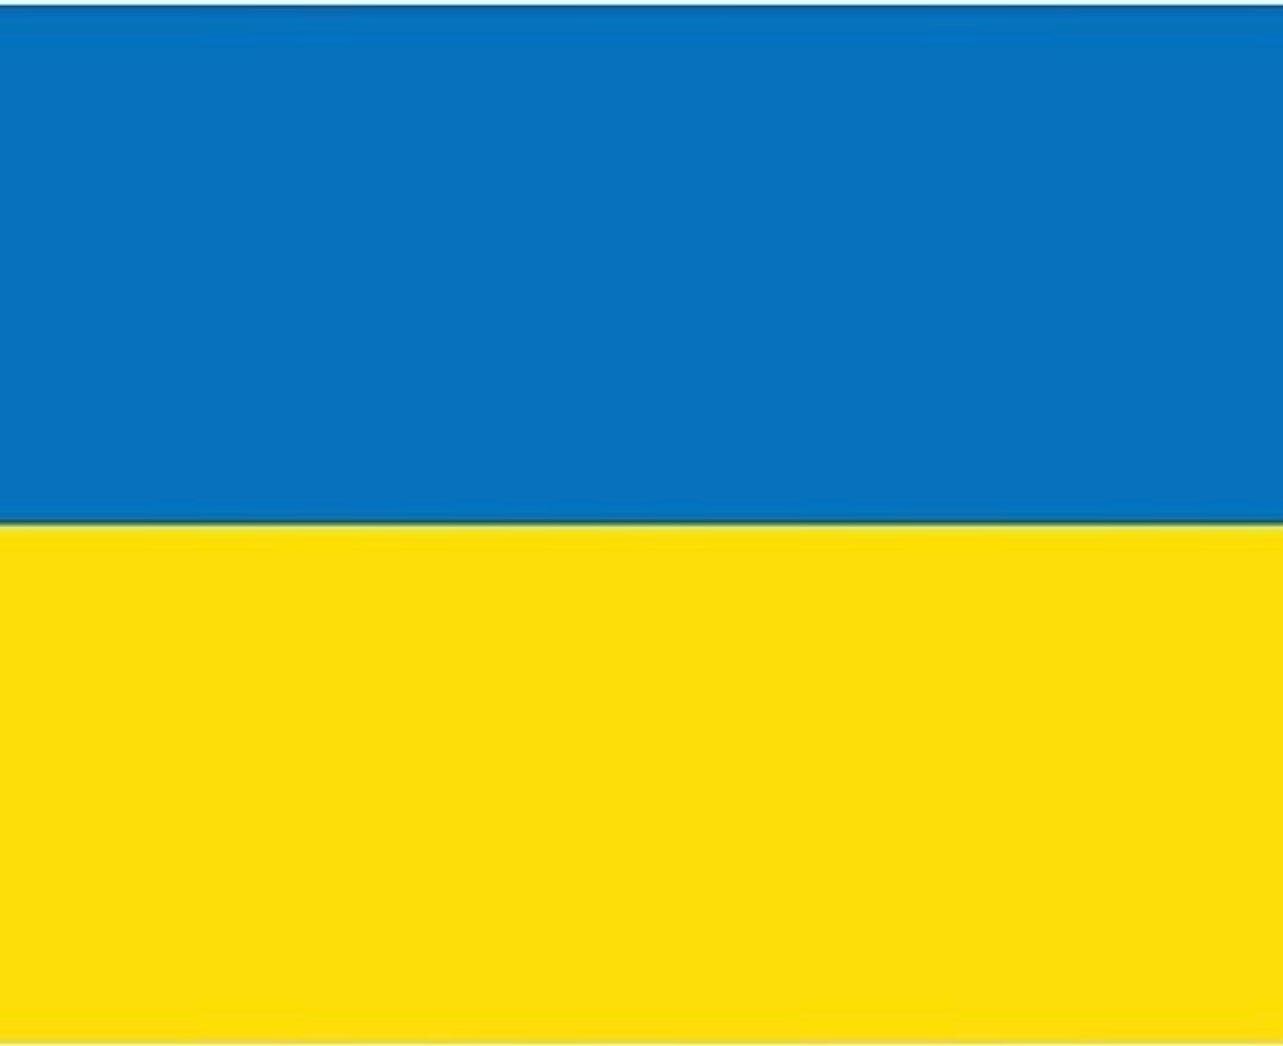 With family and close partners in Ukraine we are very sad and Devastated by the tragic events taking shape in Ukraine. We are praying for swift end to this injustice. More than ever we all need to unite as people and work together as one united peopl